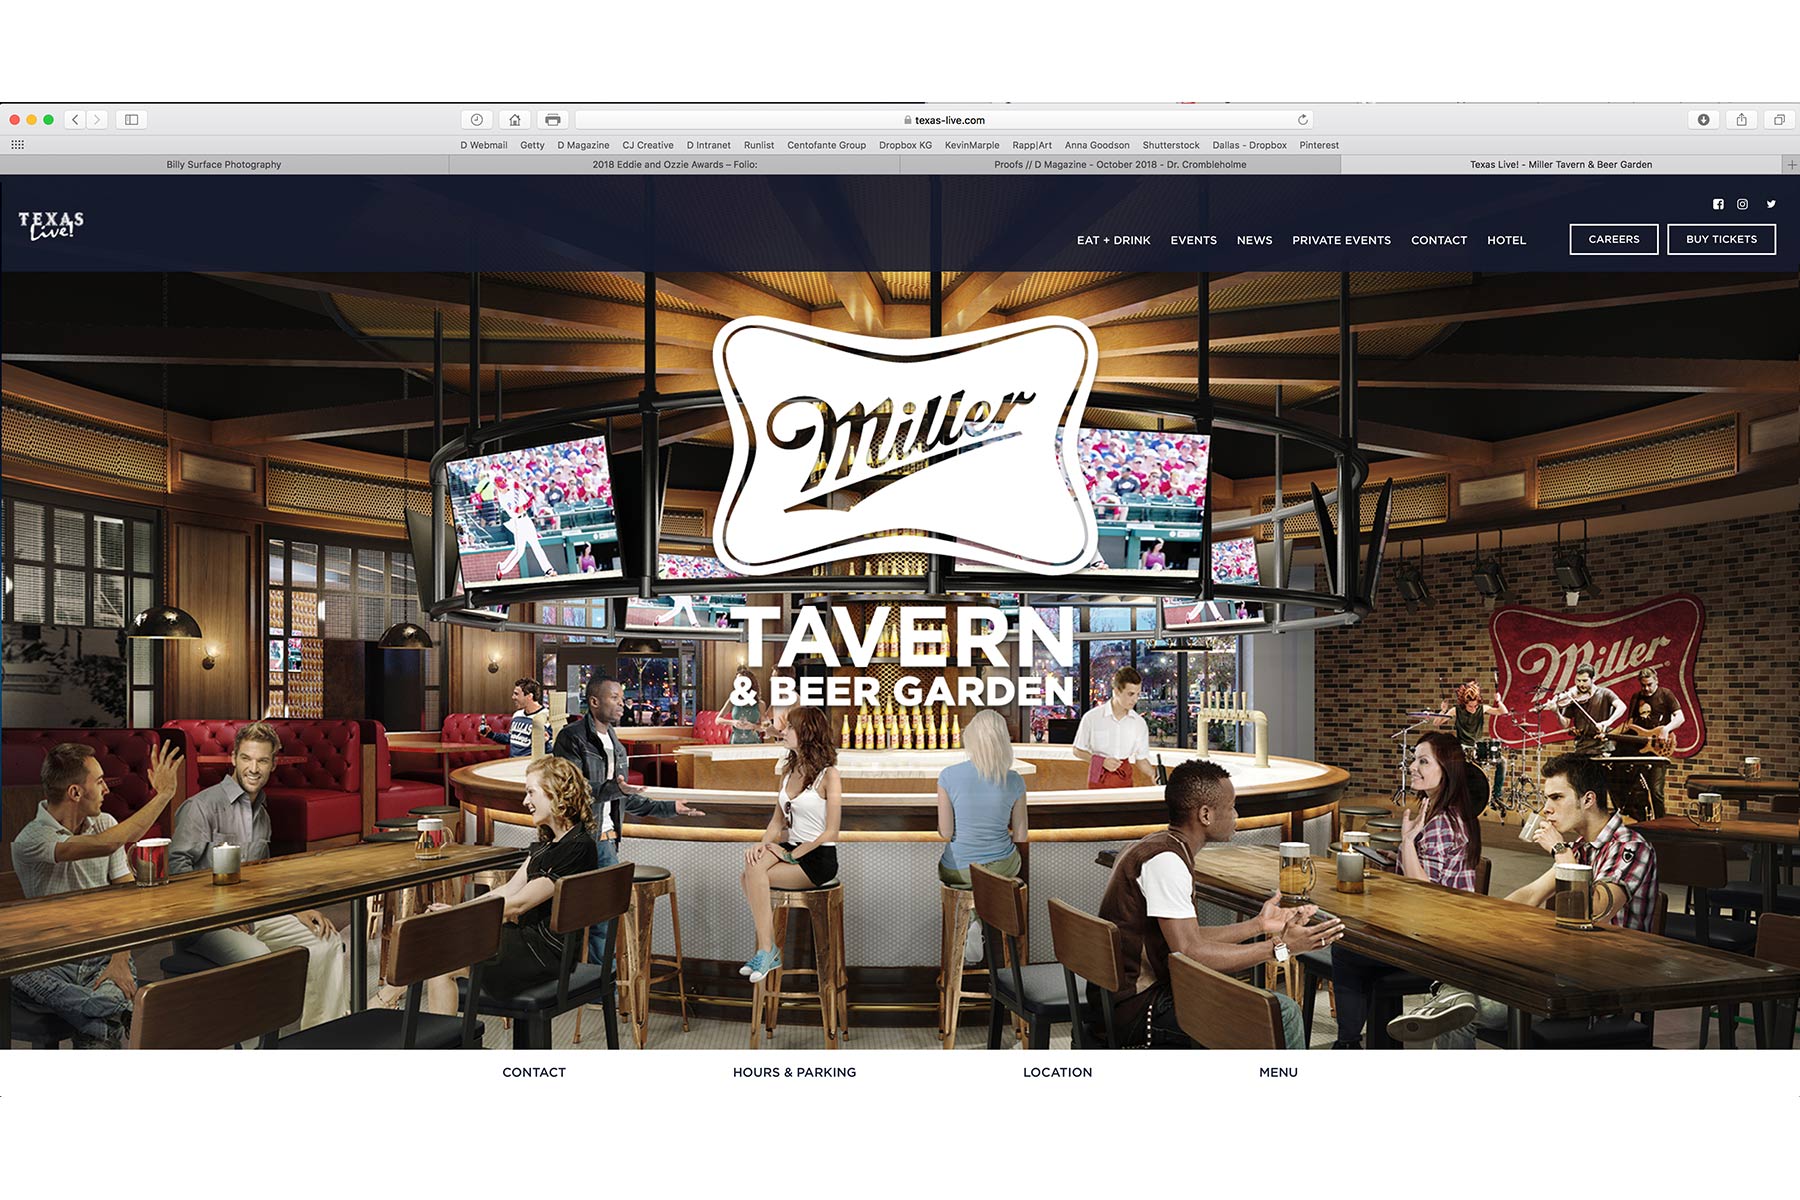 A review of Texas Live!'s Miller Tavern & Beer Garden, Based On This